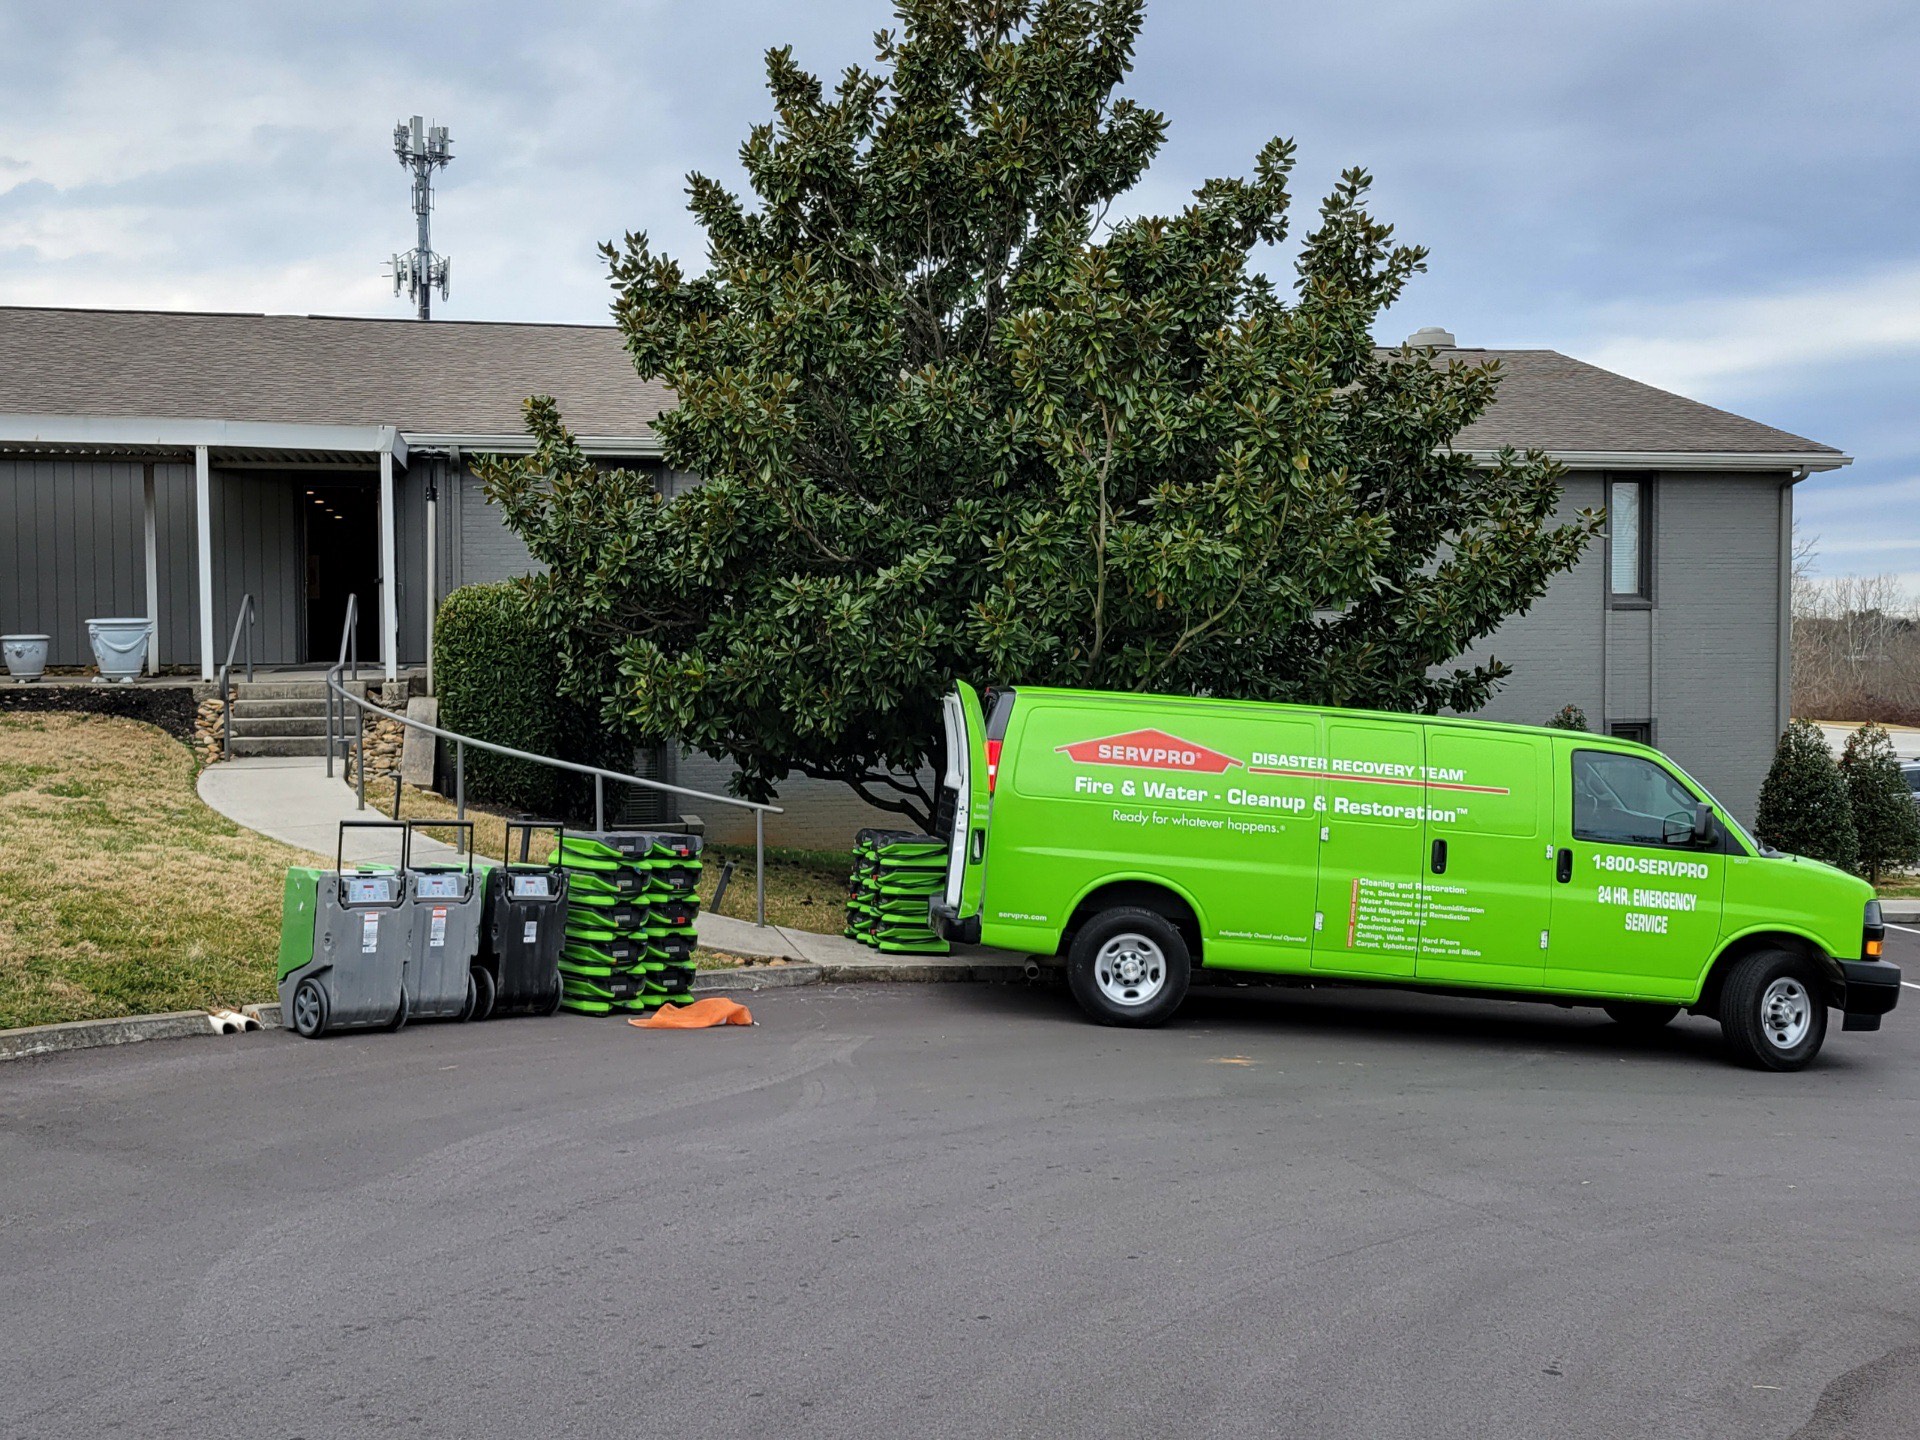 When you call our SERVPRO of Deltona North team, you can count on an immediate response 24/7/365.